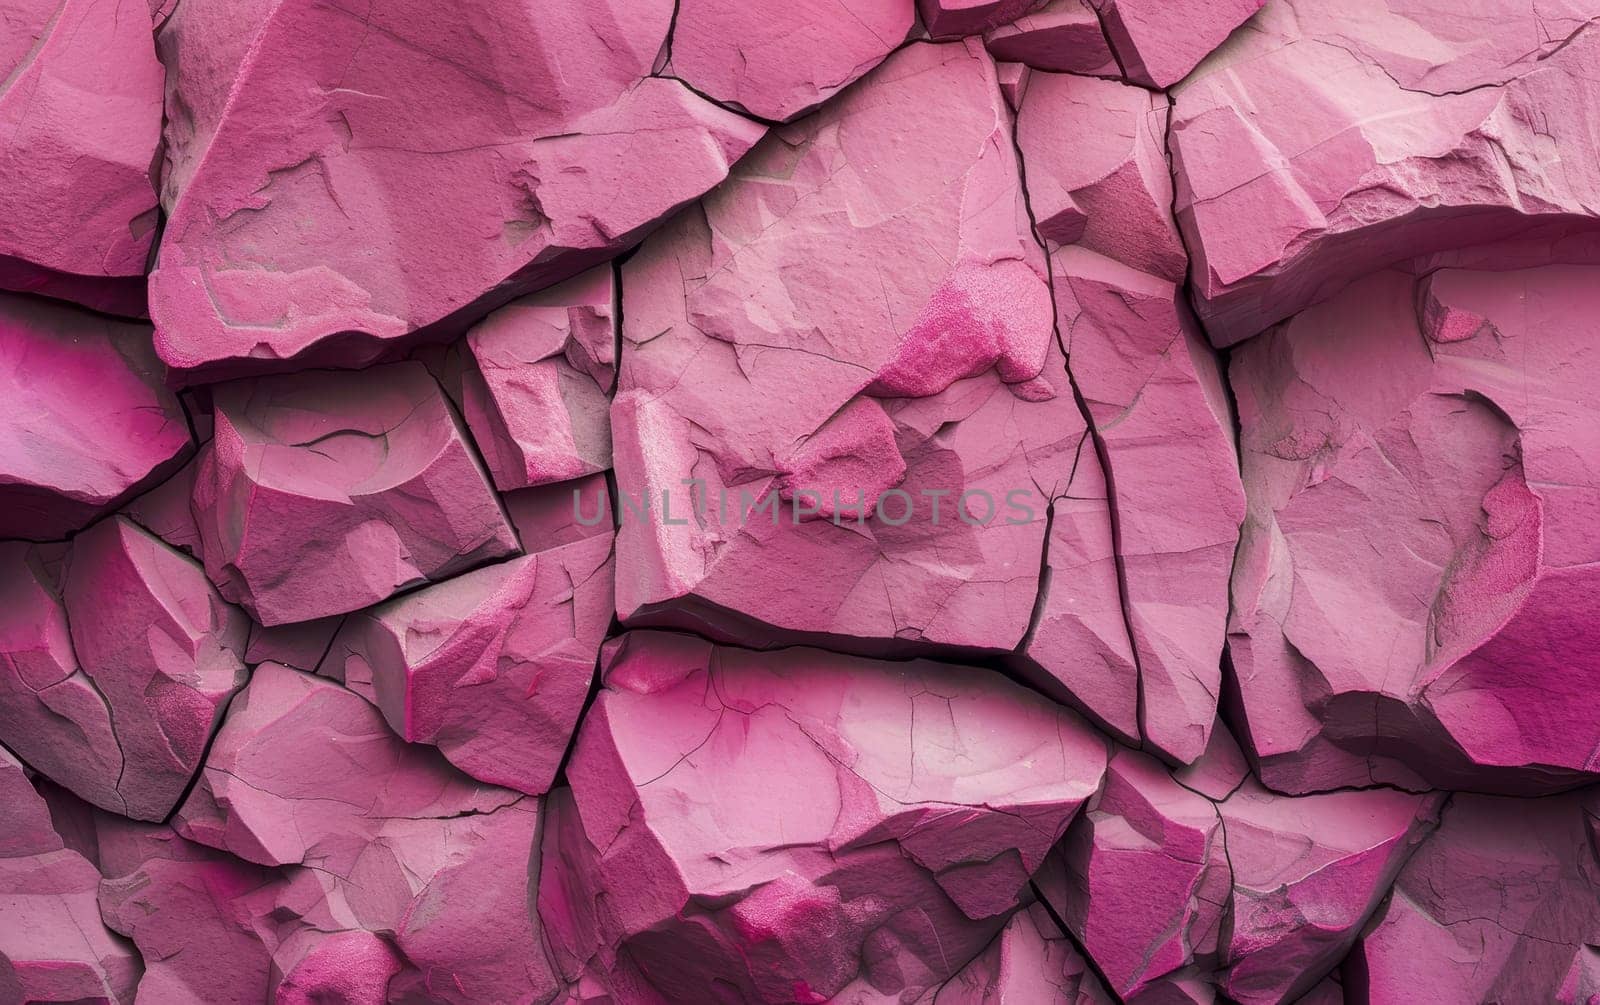 Overhead view of cracked pink stones forming a textured pattern